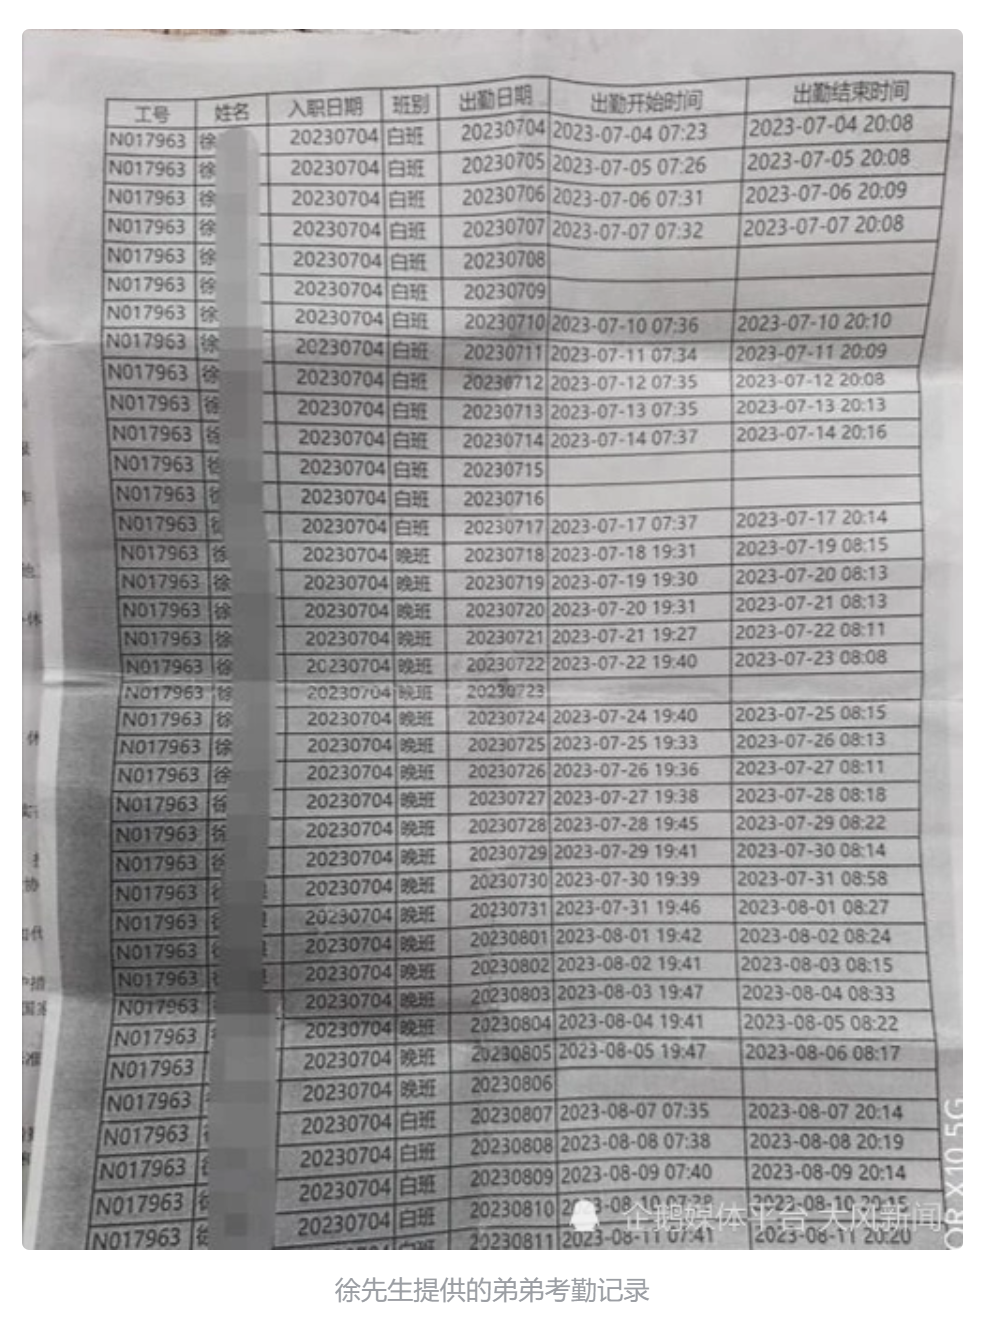 Worker Xu's log of dates and times worked since he started employment at Qisda on 4 July 2023